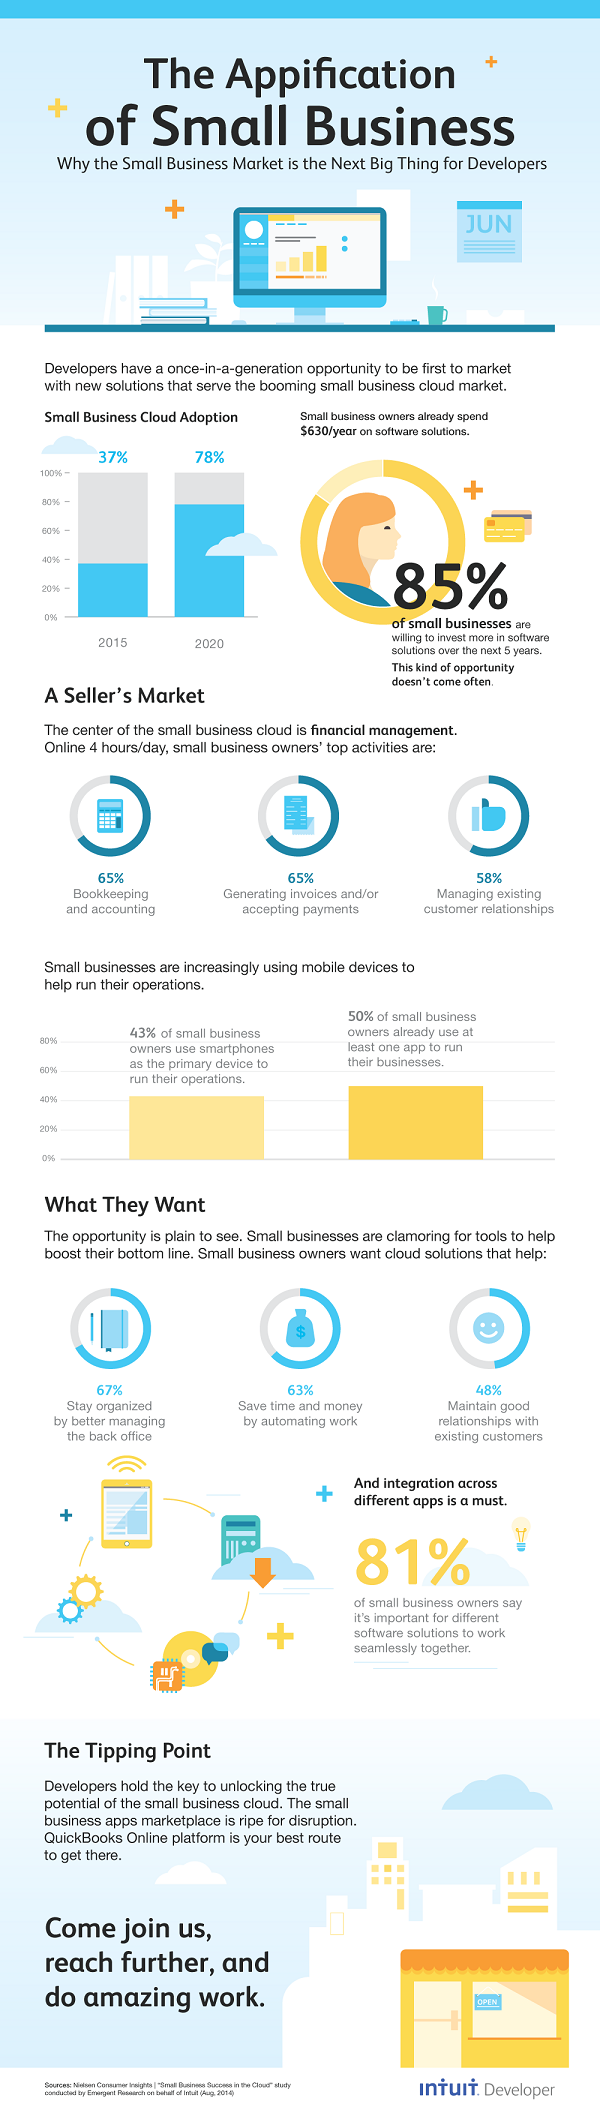 Appification of Small Business Infographic